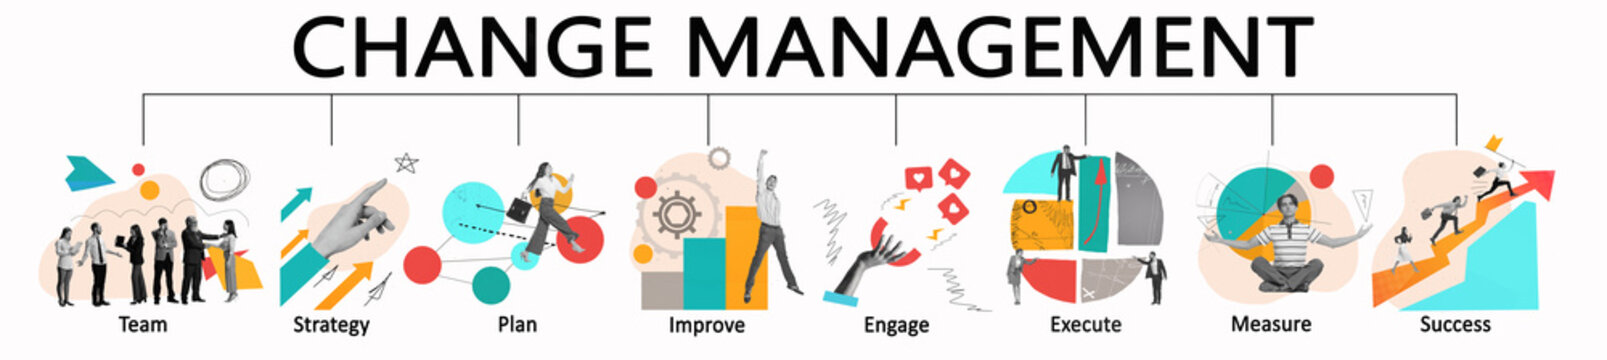 Change Management is collective term for all approaches to prepare, support, and help individuals, teams, organizations, change. Banner, flyer, art collage, design of business concept